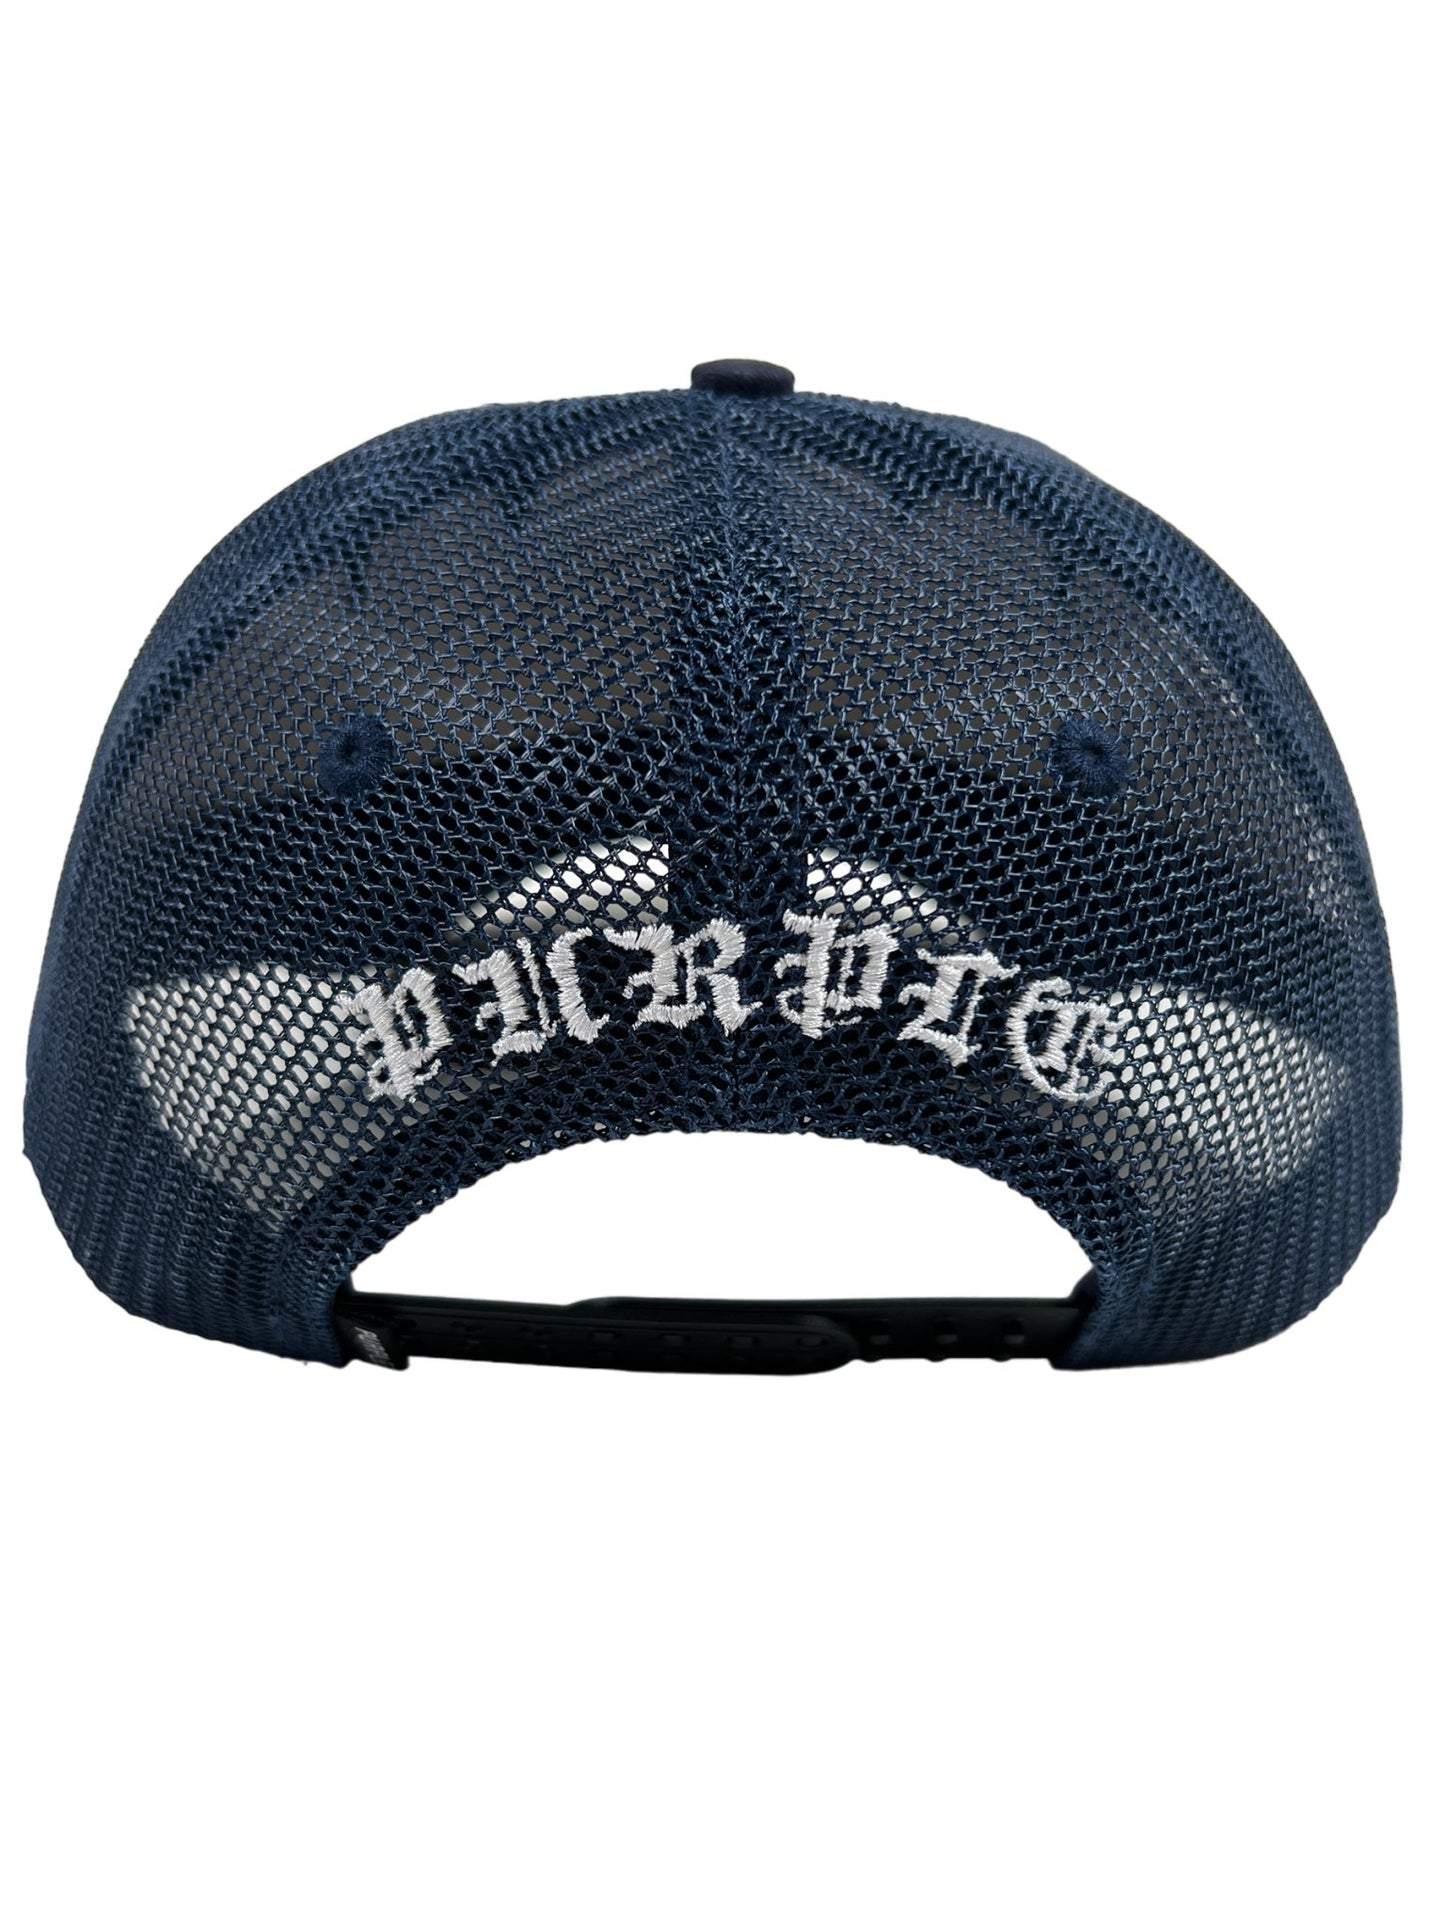 Rear view of a navy blue mesh Purple Brand A2054-TTGN Cotton Twill trucker hat with a white "pickering" logo embroidery on the back.